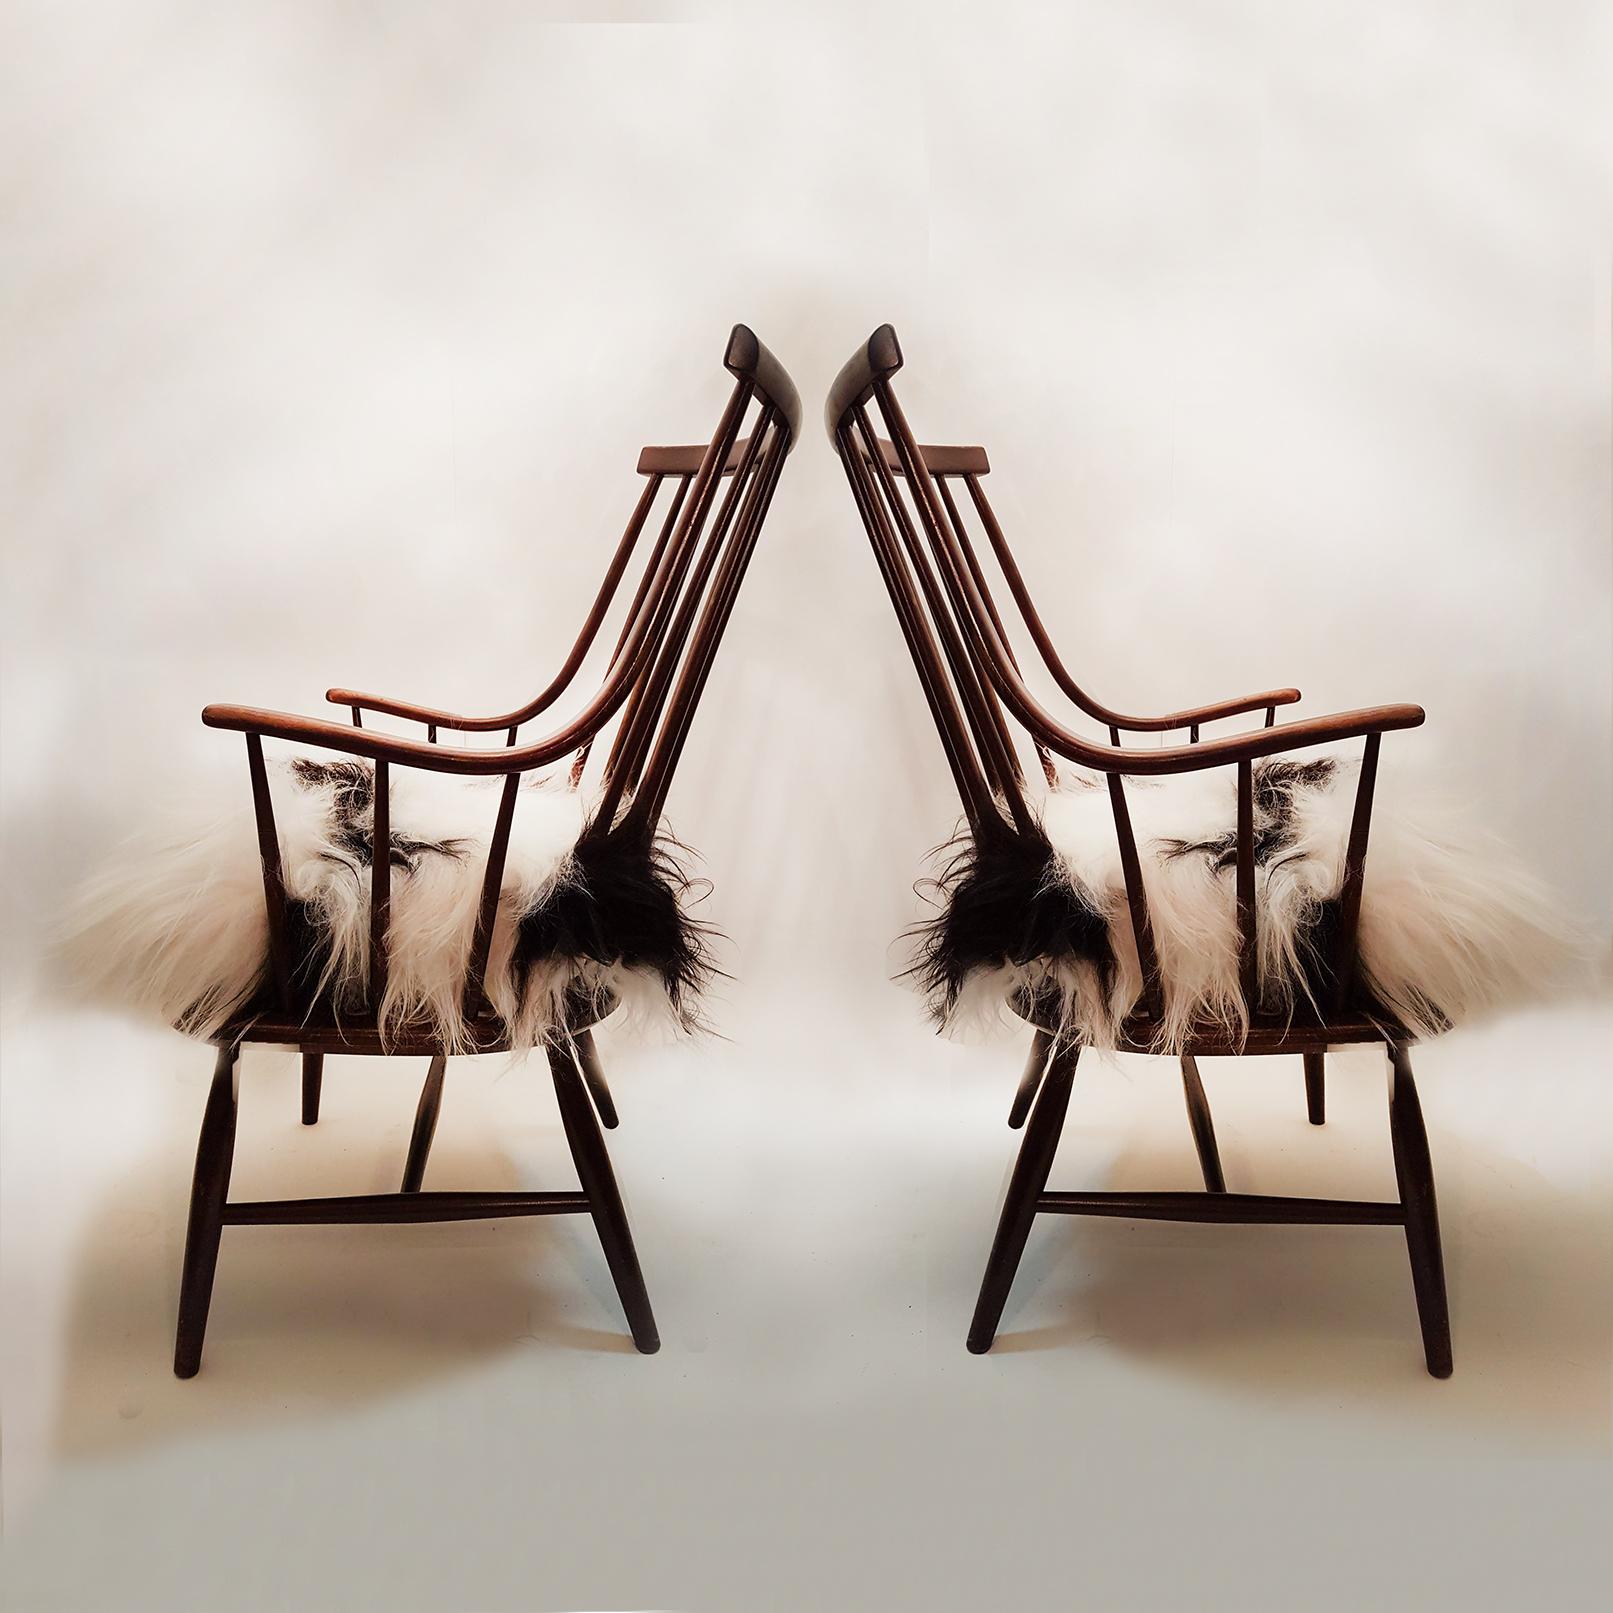 Onelarge armchairs, model 